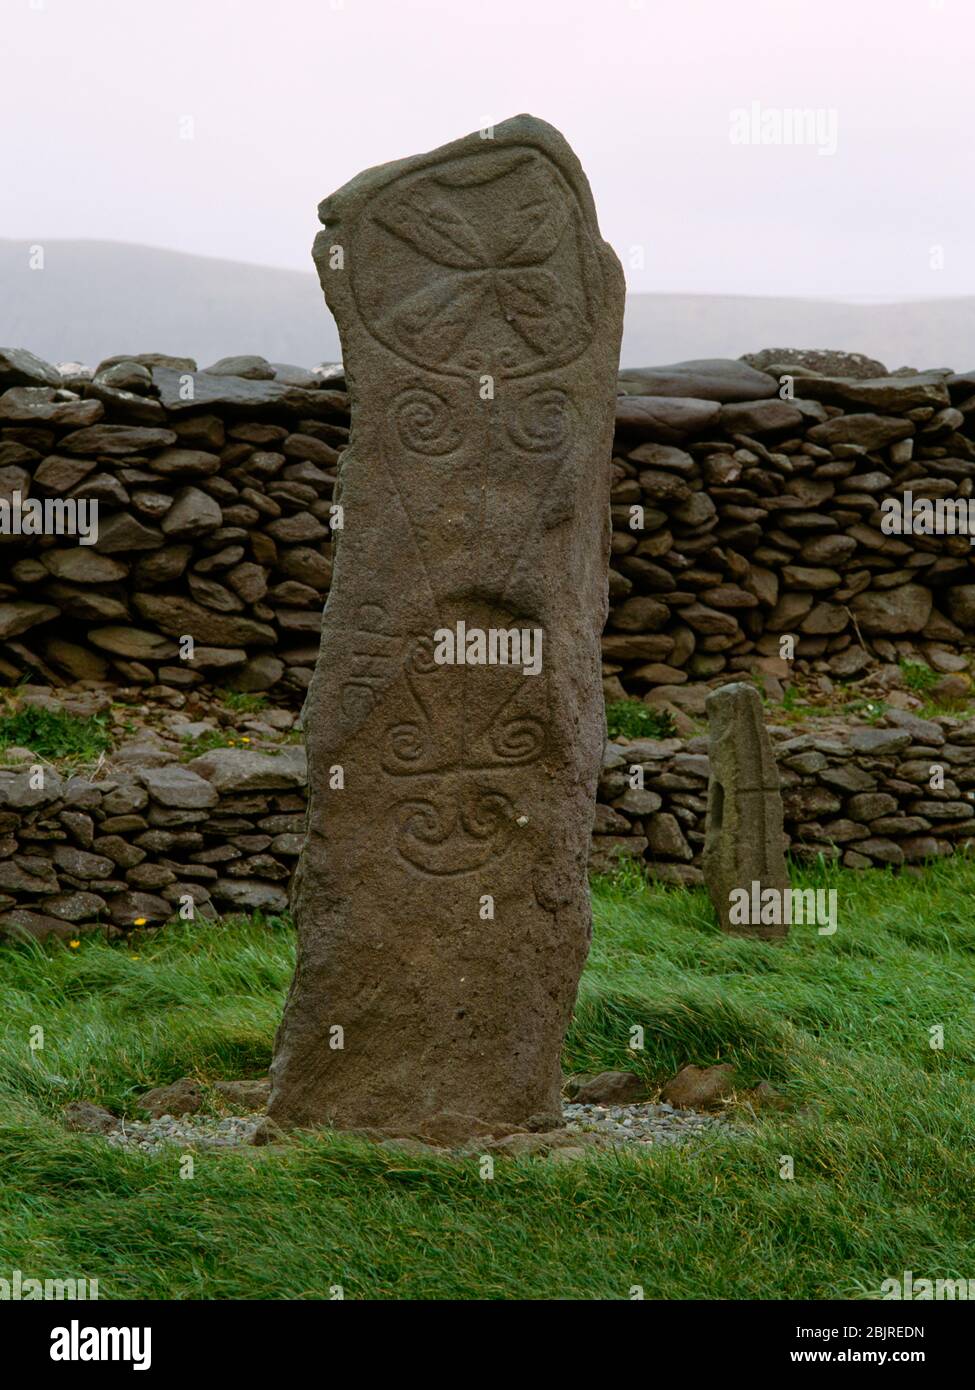 Two (of three) Early Christian cross-inscribed stones in an old walled monastic enclosure at Reask, Co Kerry, Republic of Ireland. The tall thin sands Stock Photo